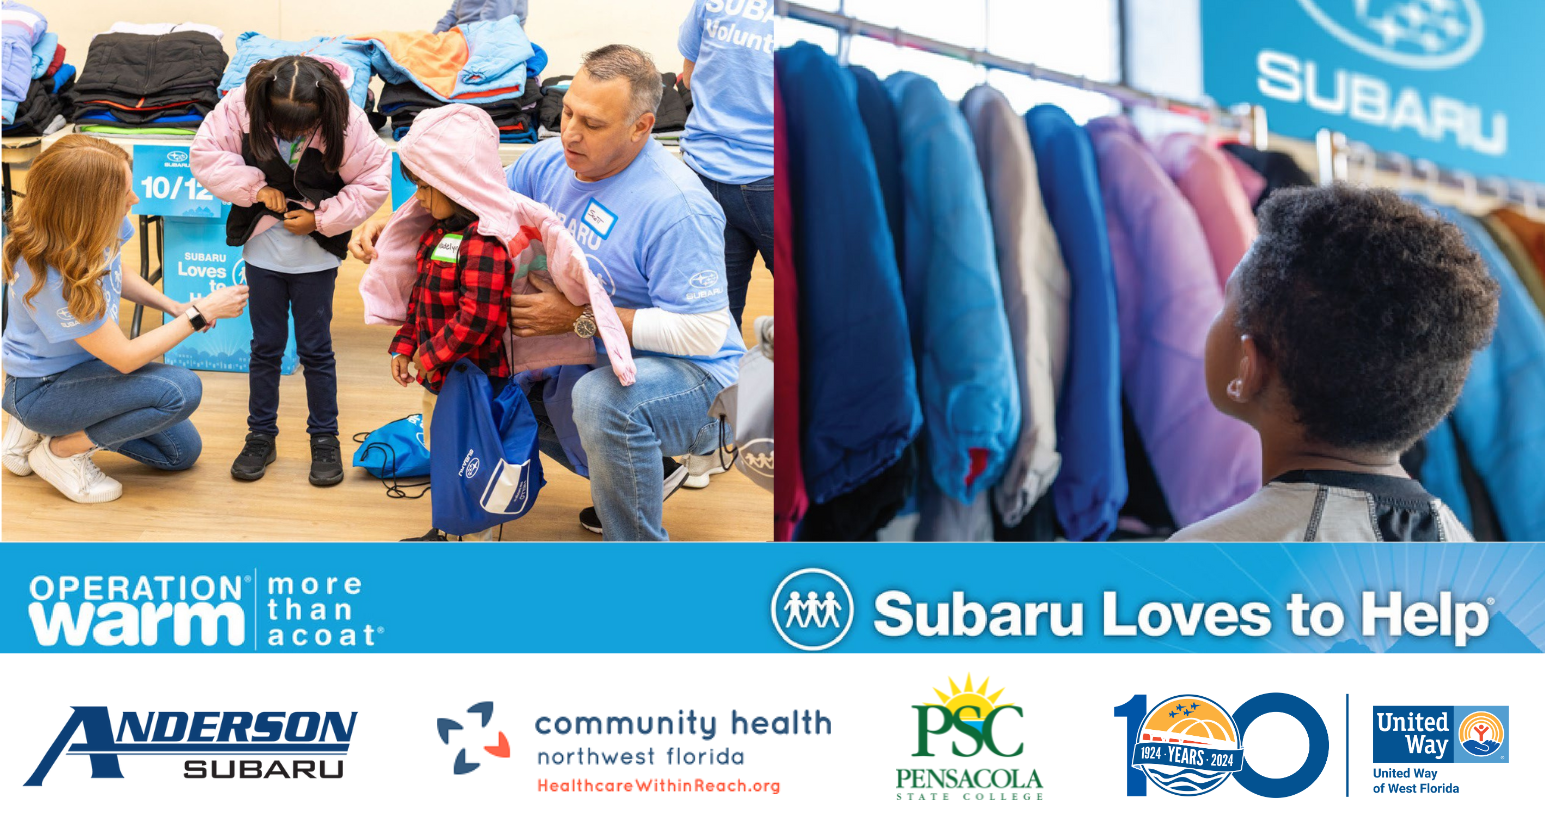 Subaru operation warm volunteers helping chidren put on coats with a blue bar underneath that says operation warm, more than a coat on the left and subaru loves to help on the right. under everything is the anderson subaru, community health northwest florida, pensacola state college and the united way of west florida logos